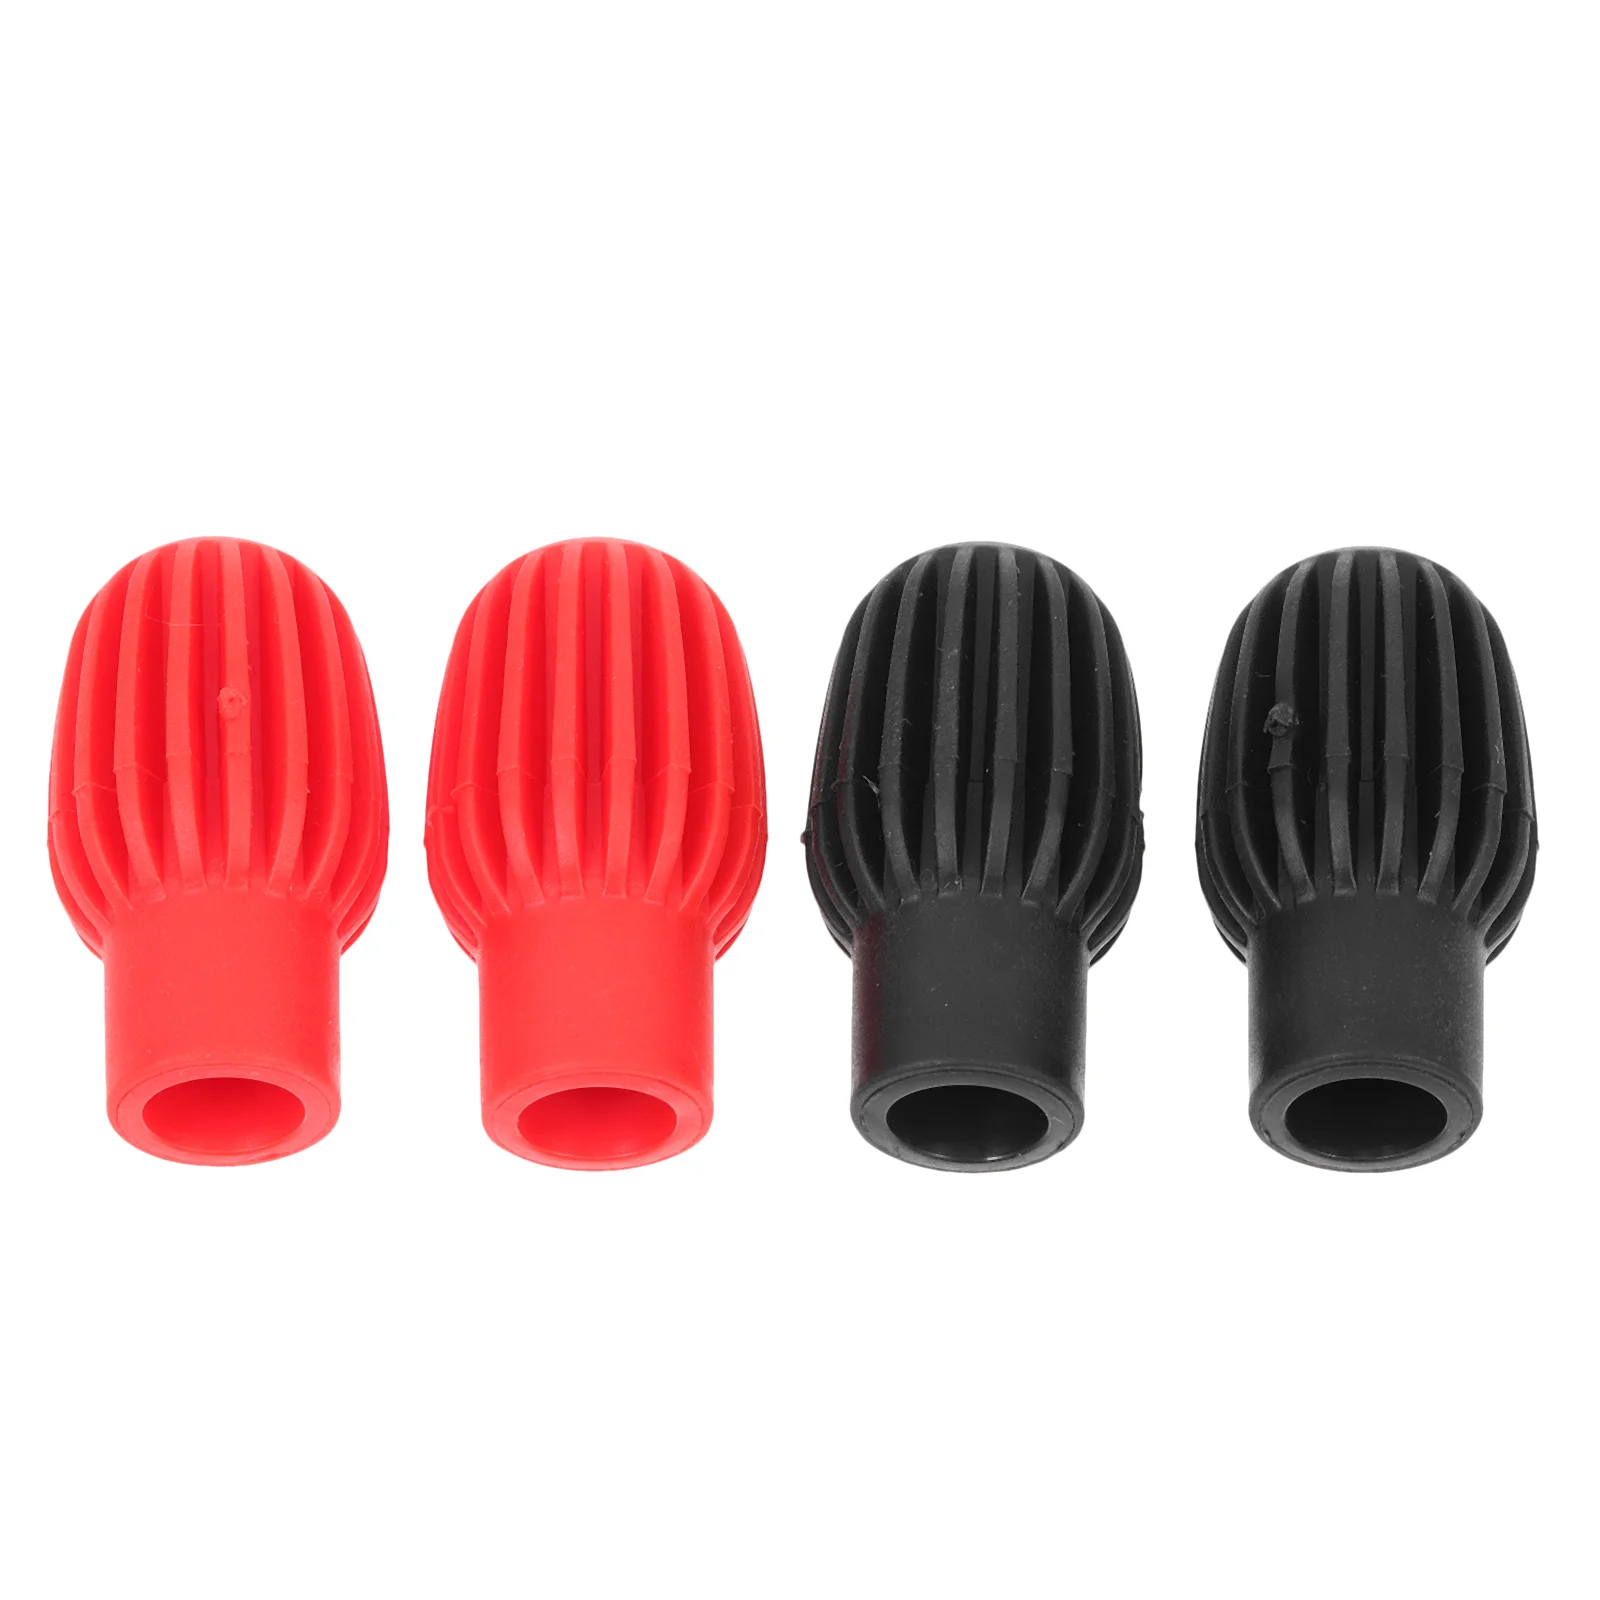 

Drumstick Tips Drum Silicone Covers Silent Stick Rubber Dampener Cover Mutecaps Cap Mallet Protectors Head Practiceprotector